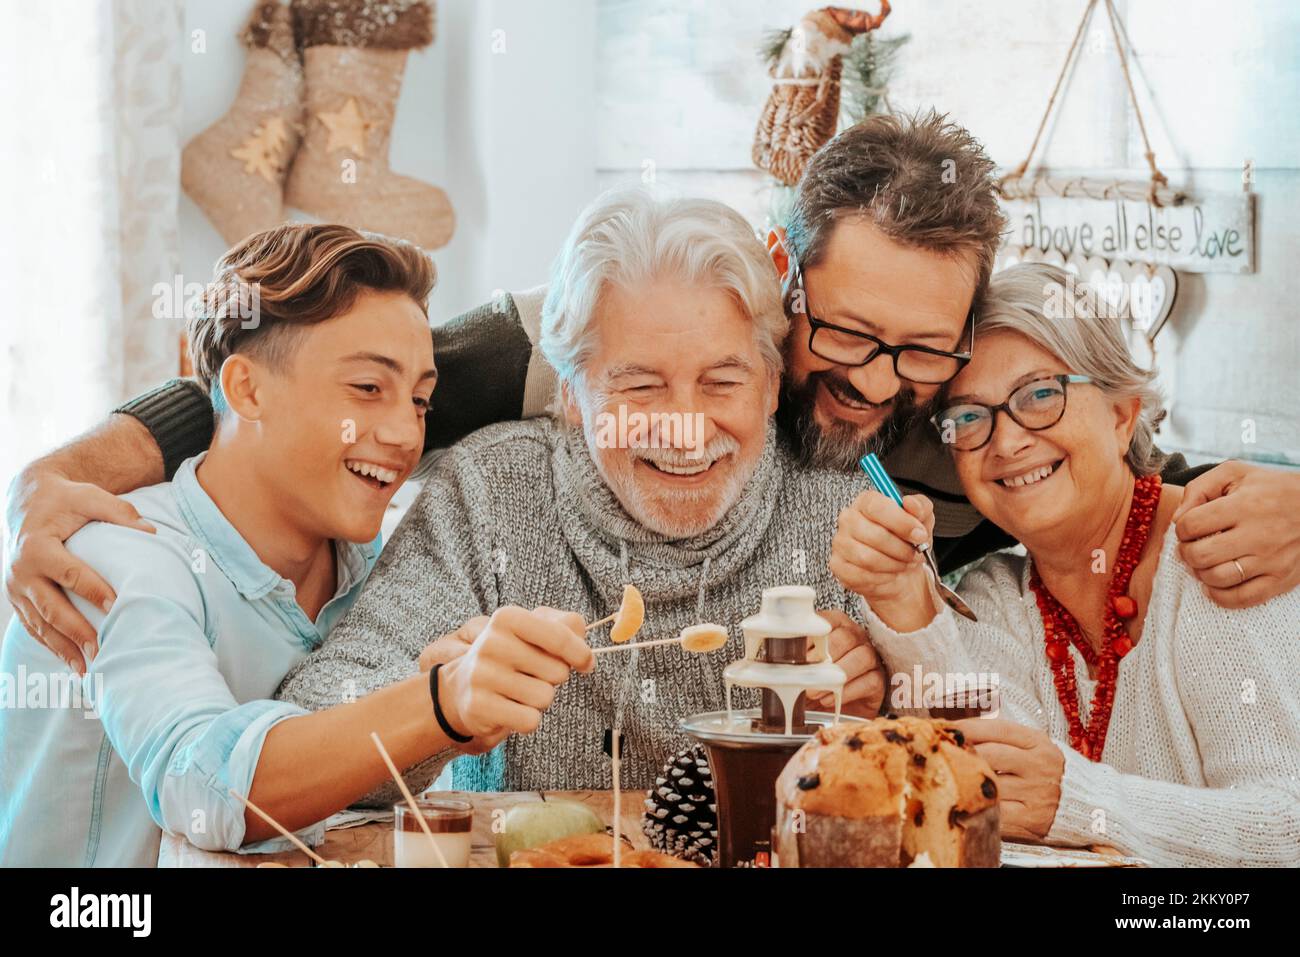 Family group celebrate together christmas lunch at the table eating and having fun in friendship. Mixed ages men and woman people enjoying holiday xma Stock Photo